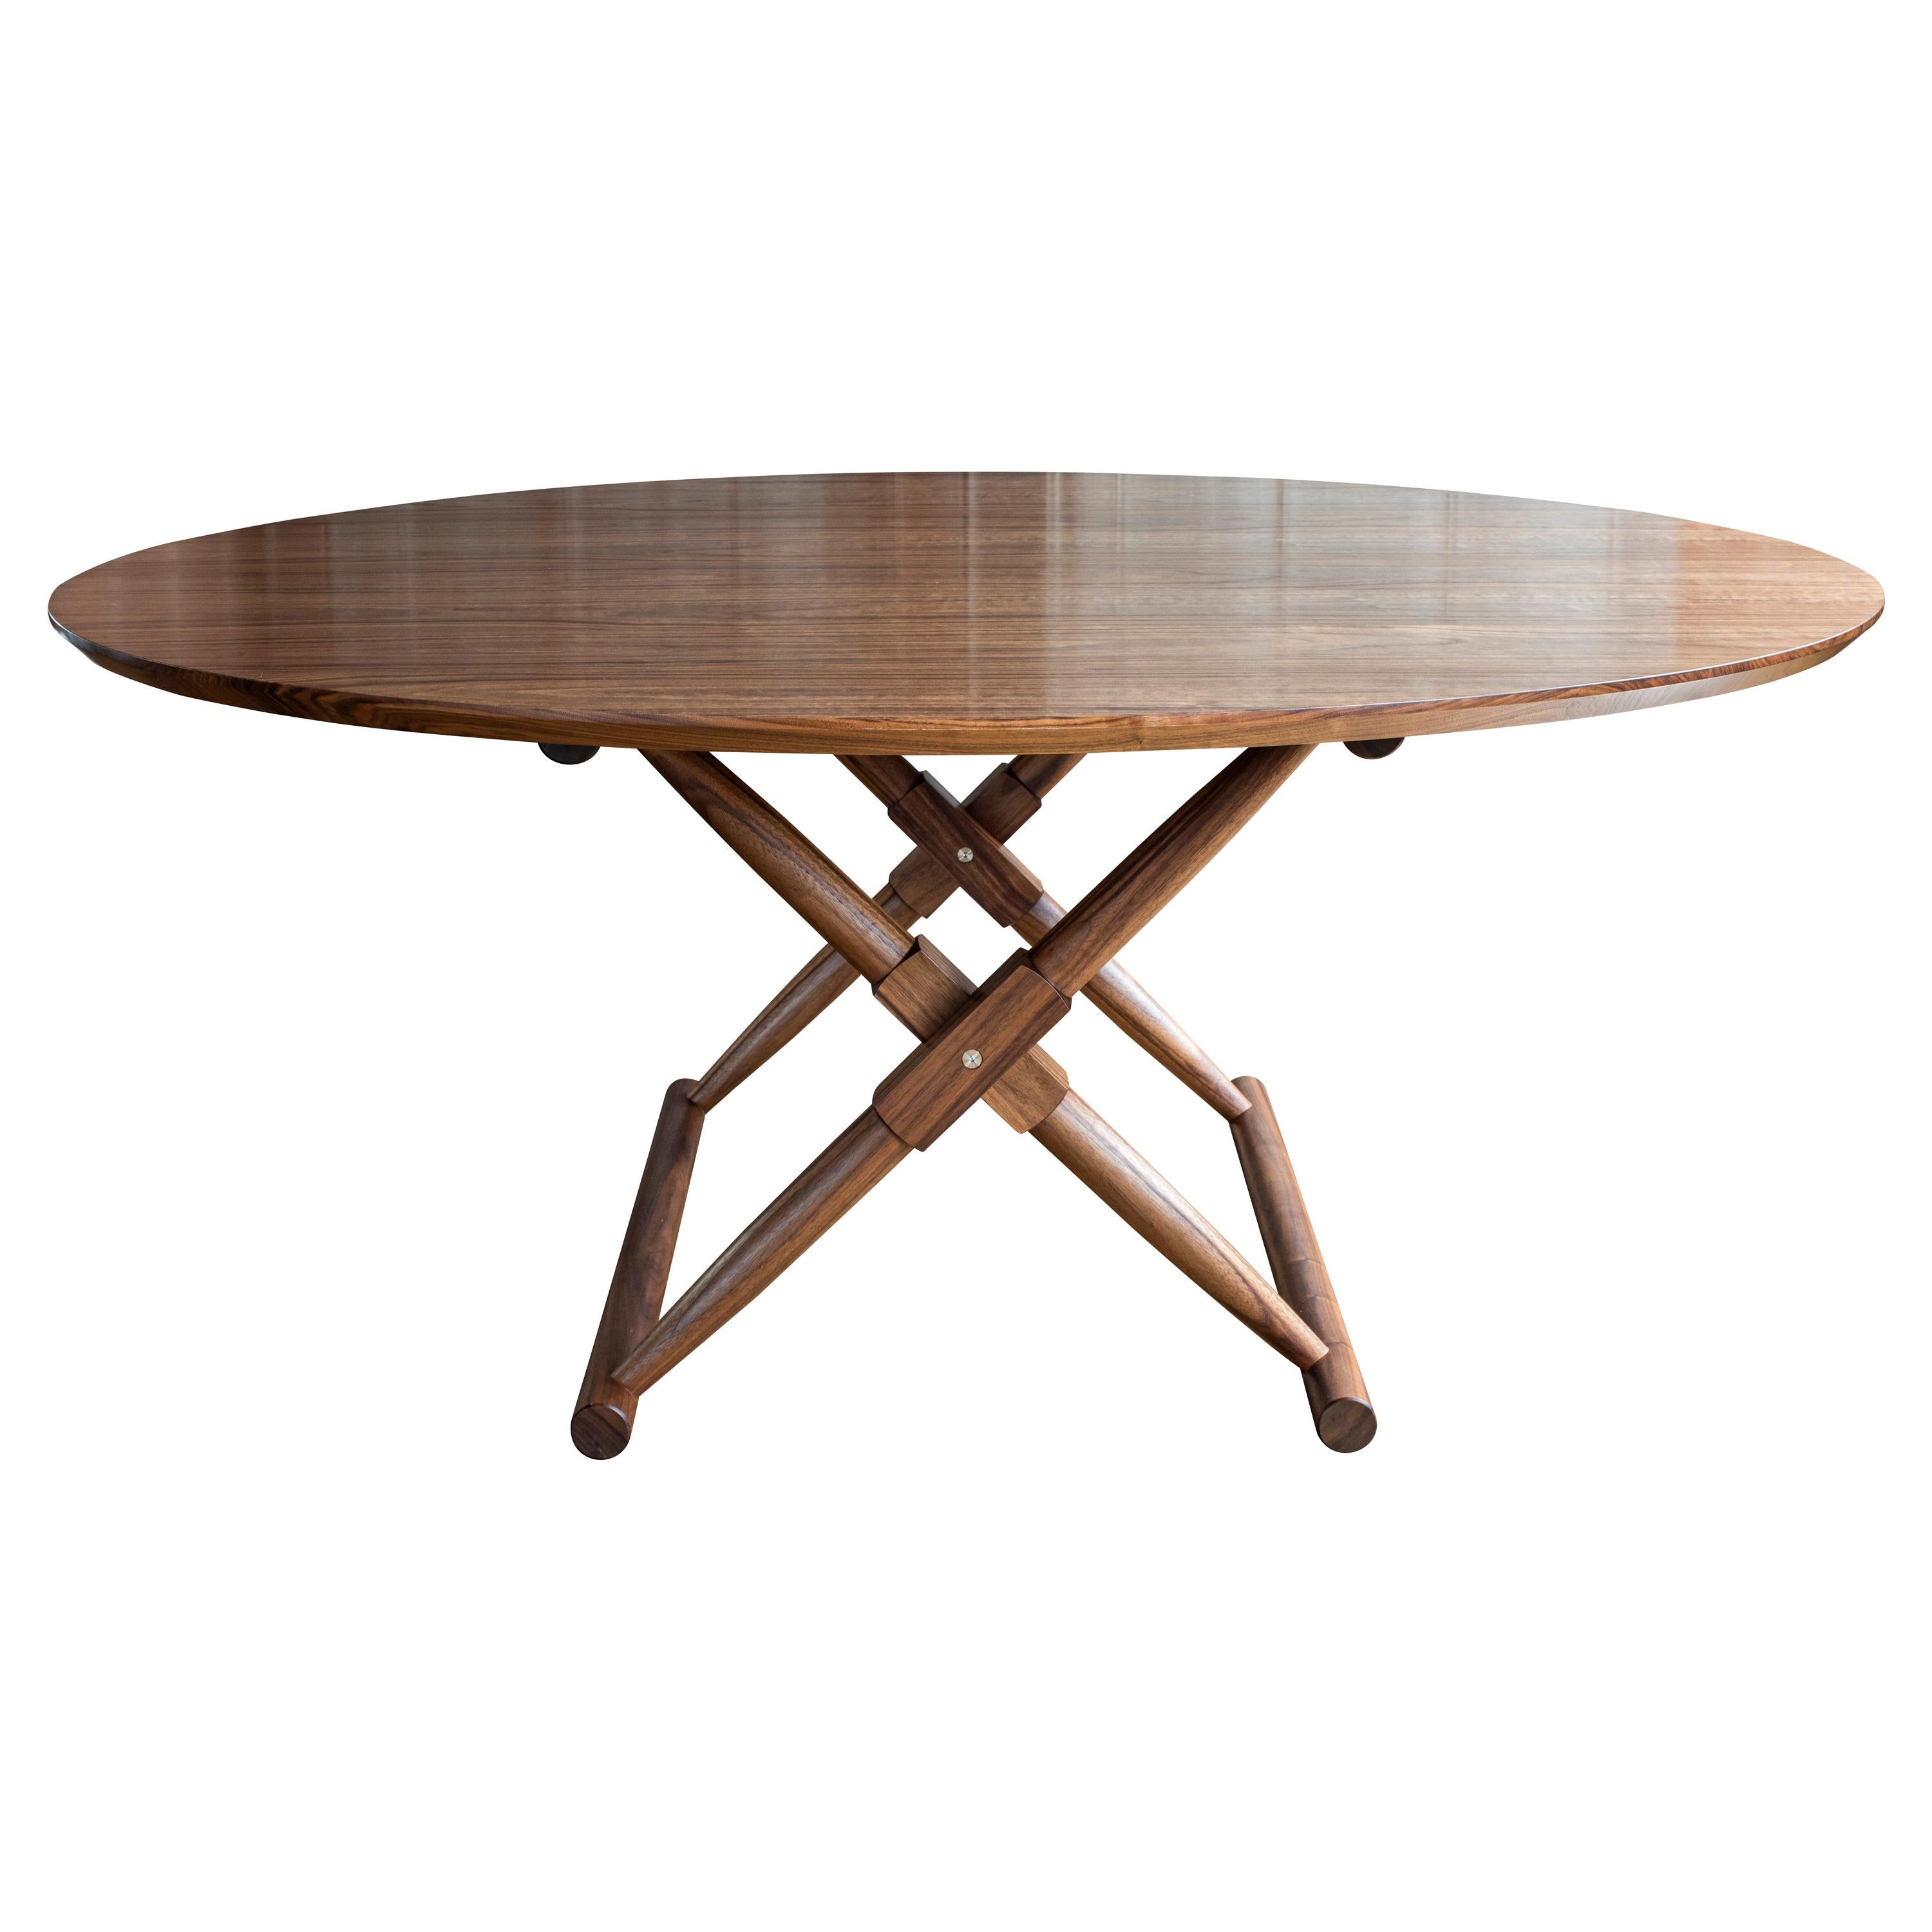 Matthiessen Table in Oiled Walnut - handcrafted by Richard Wrightman Design